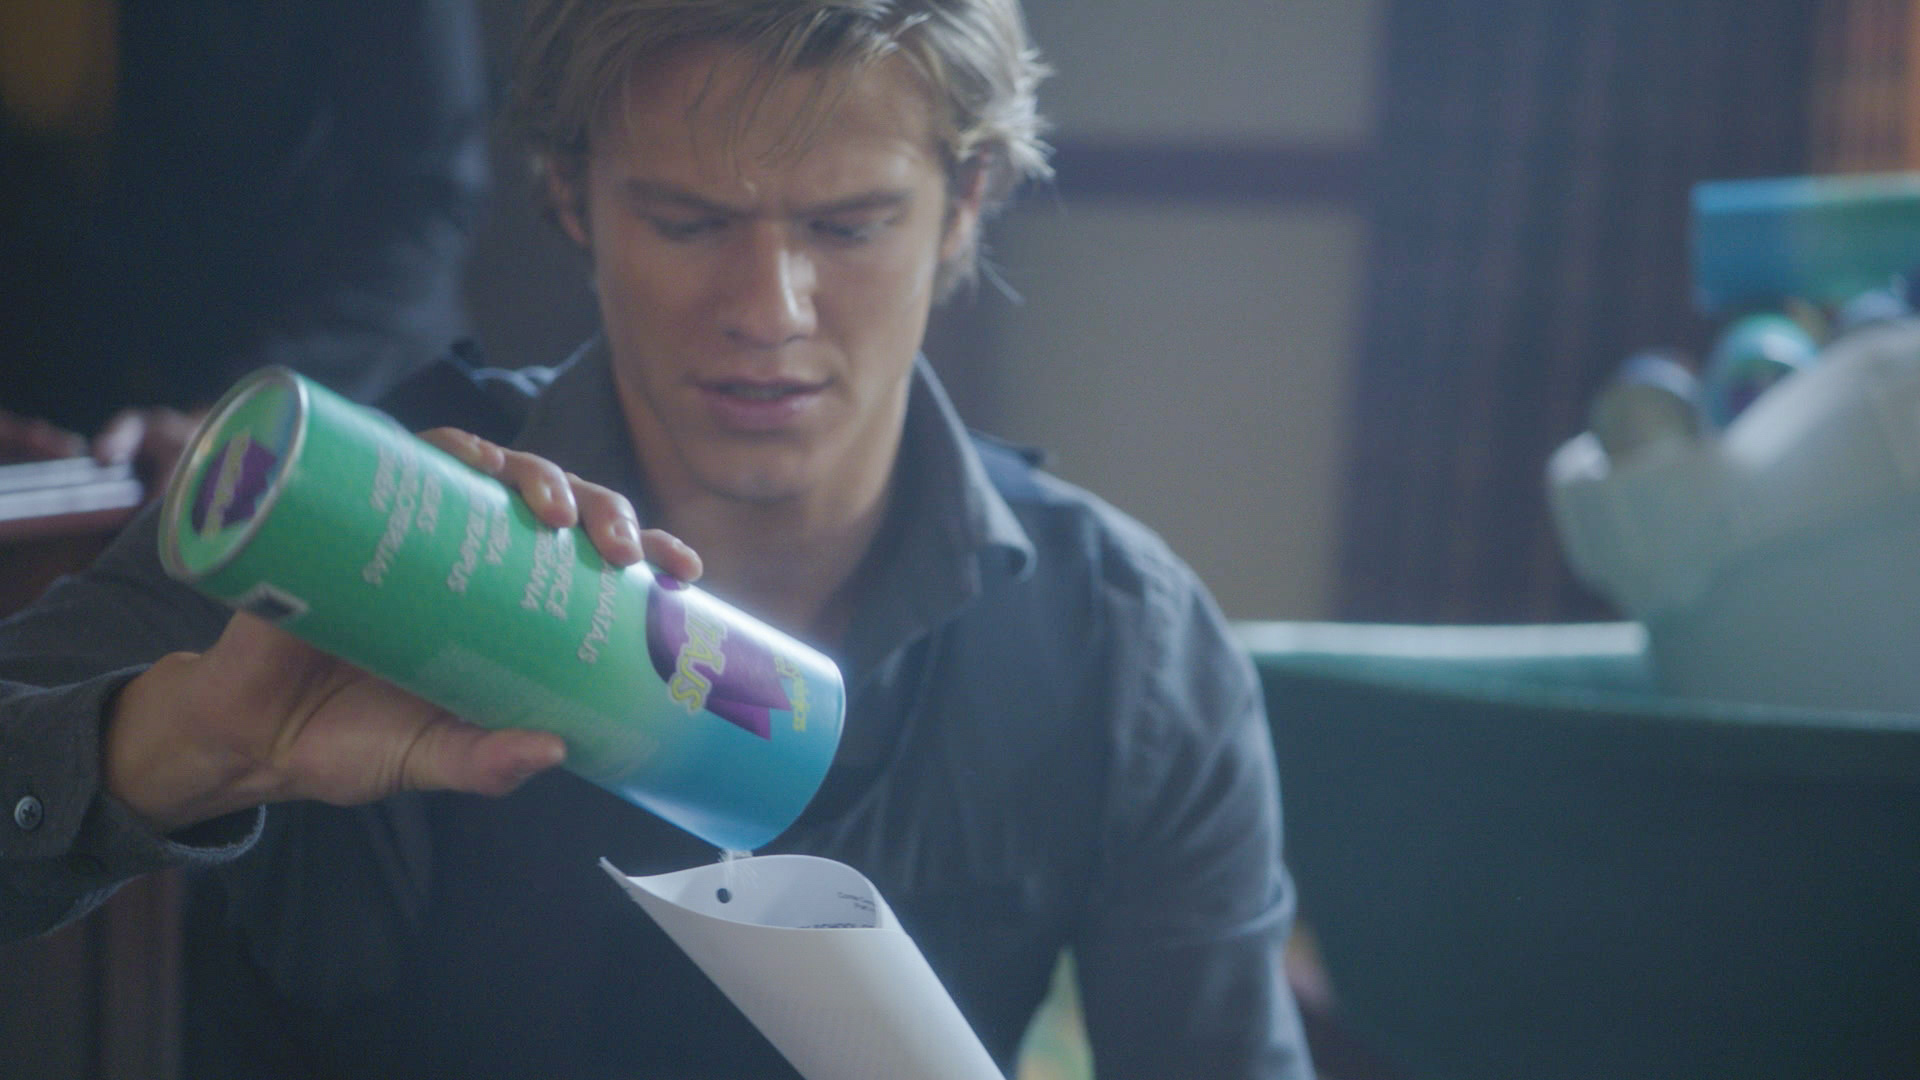 MacGyver pieces together a homemade missile launcher.